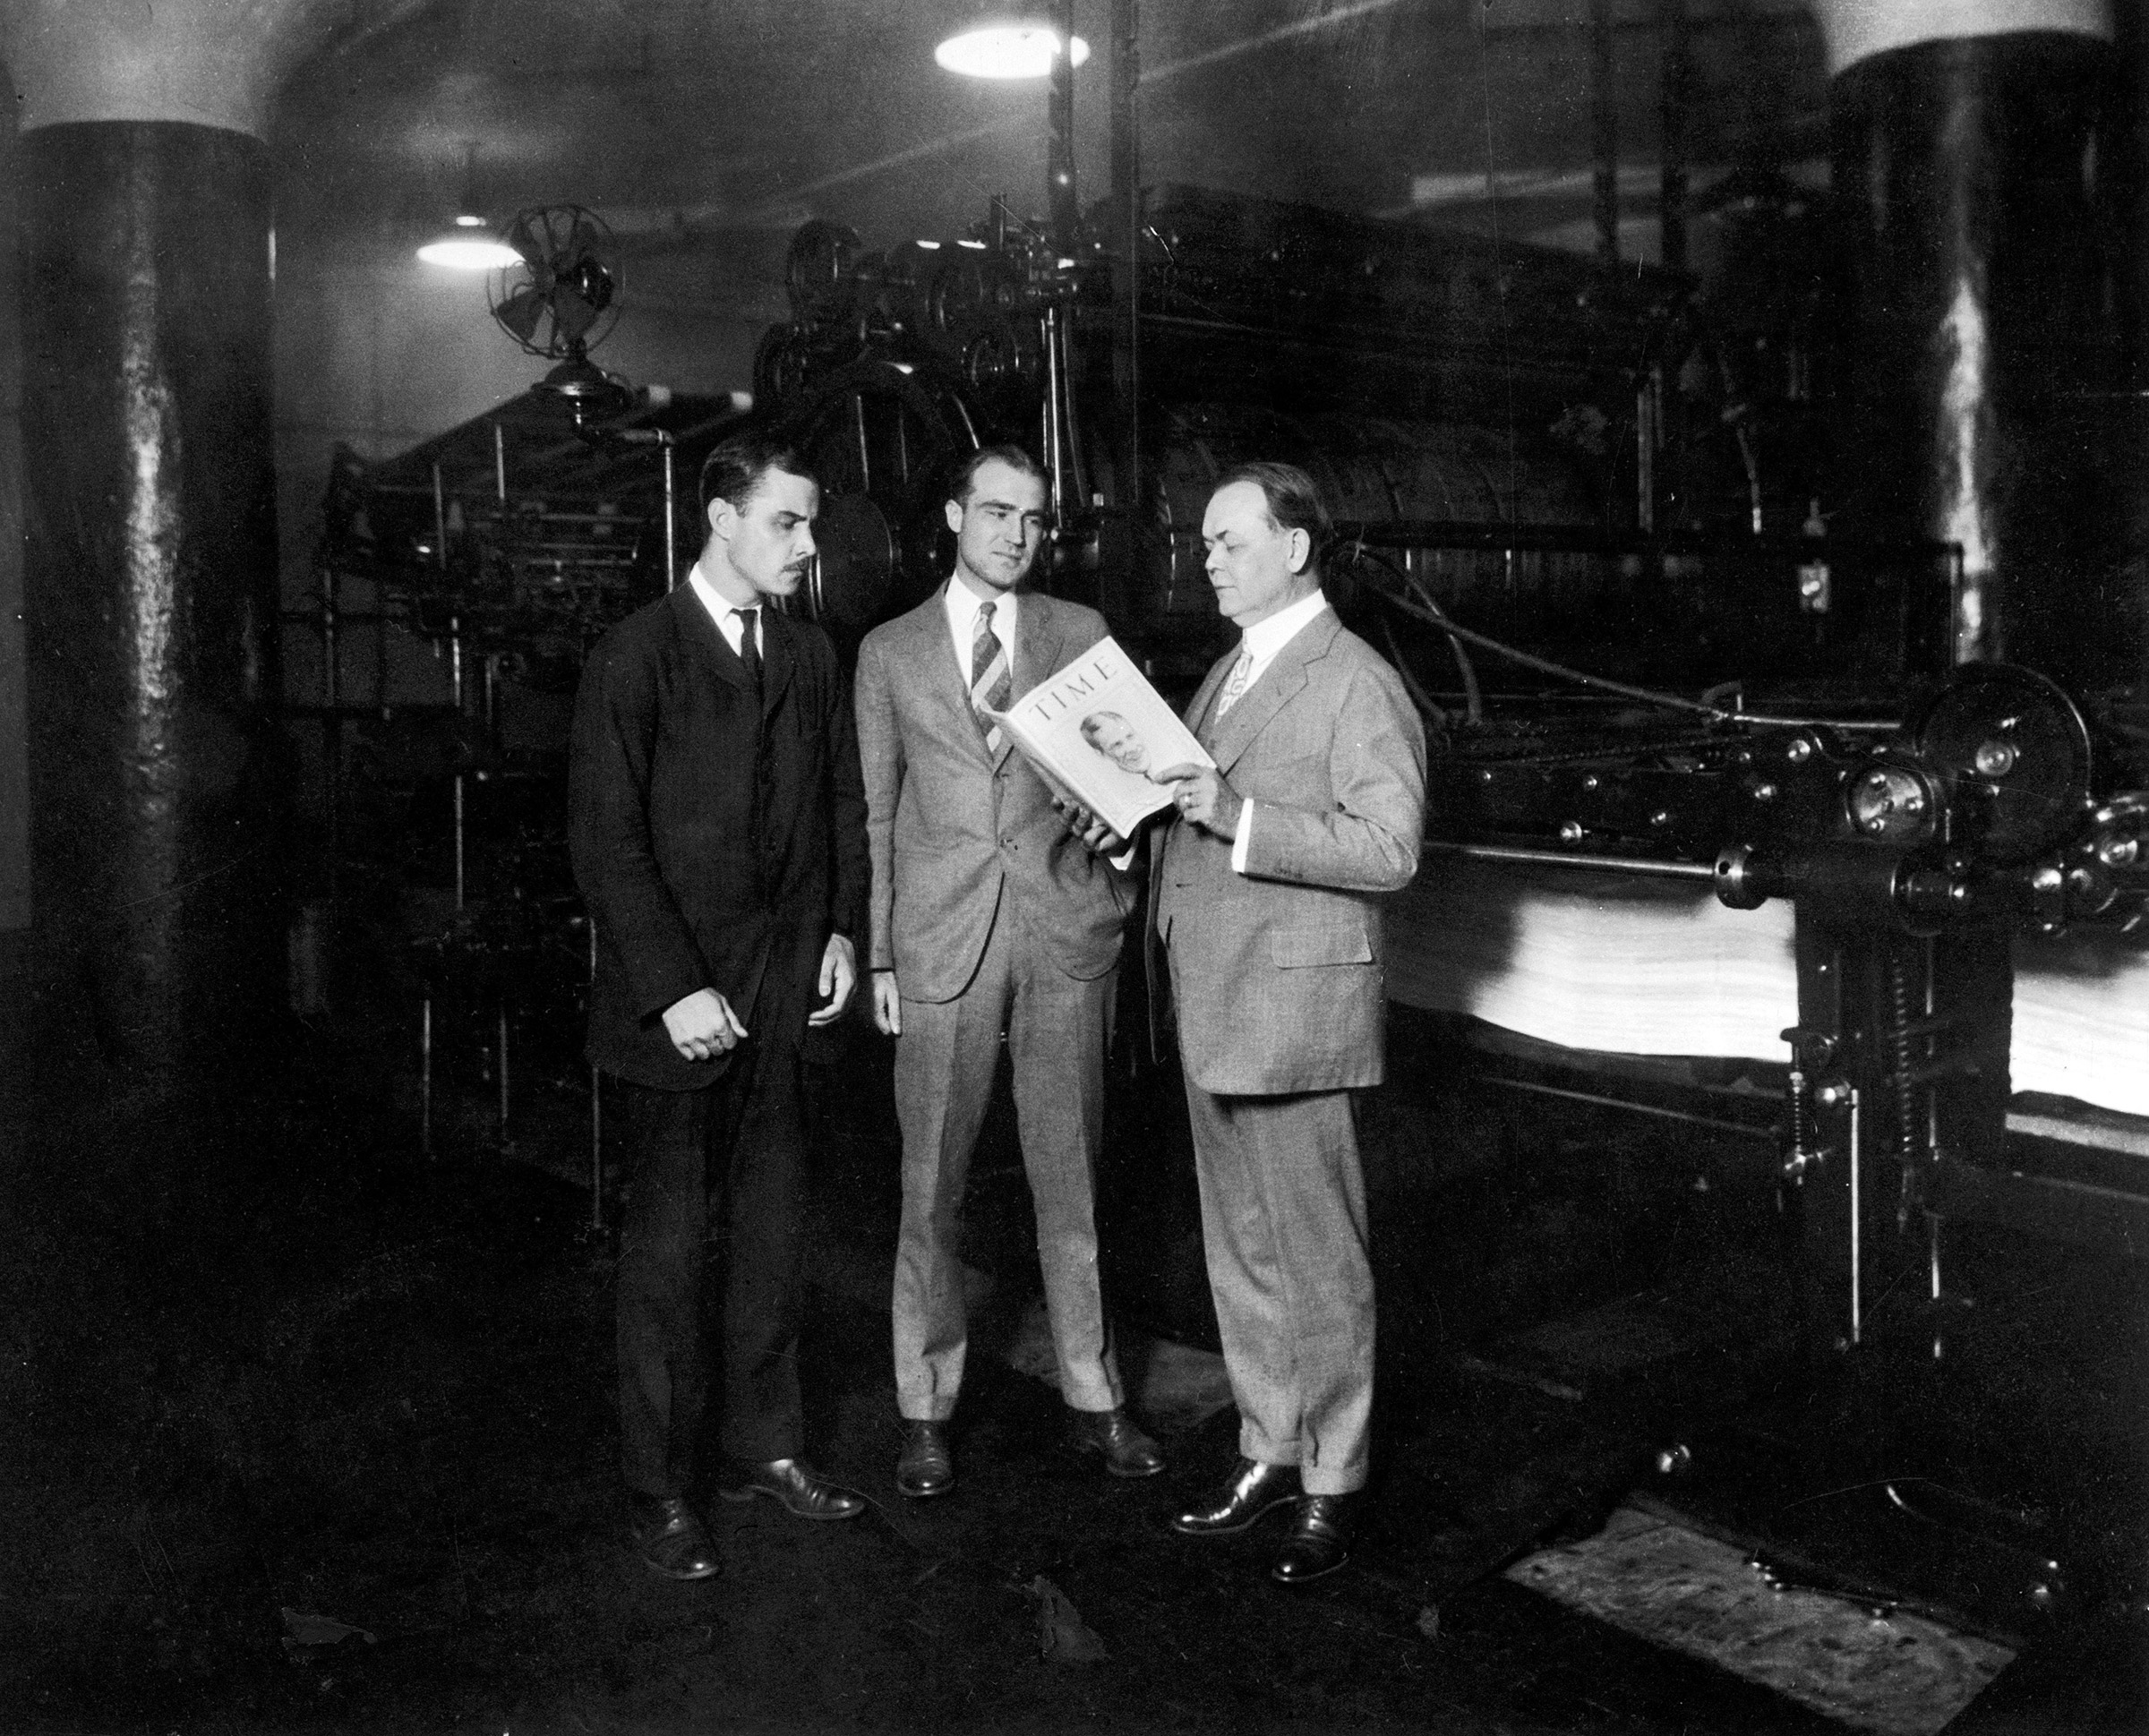 TIME co-founders Briton Hadden (left) and Henry Luce (center) with politician and Cleveland city manager William R. Hopkins, in Cleveland on Aug. 31, 1925 (The LIFE Picture Collection/Shutterstock)